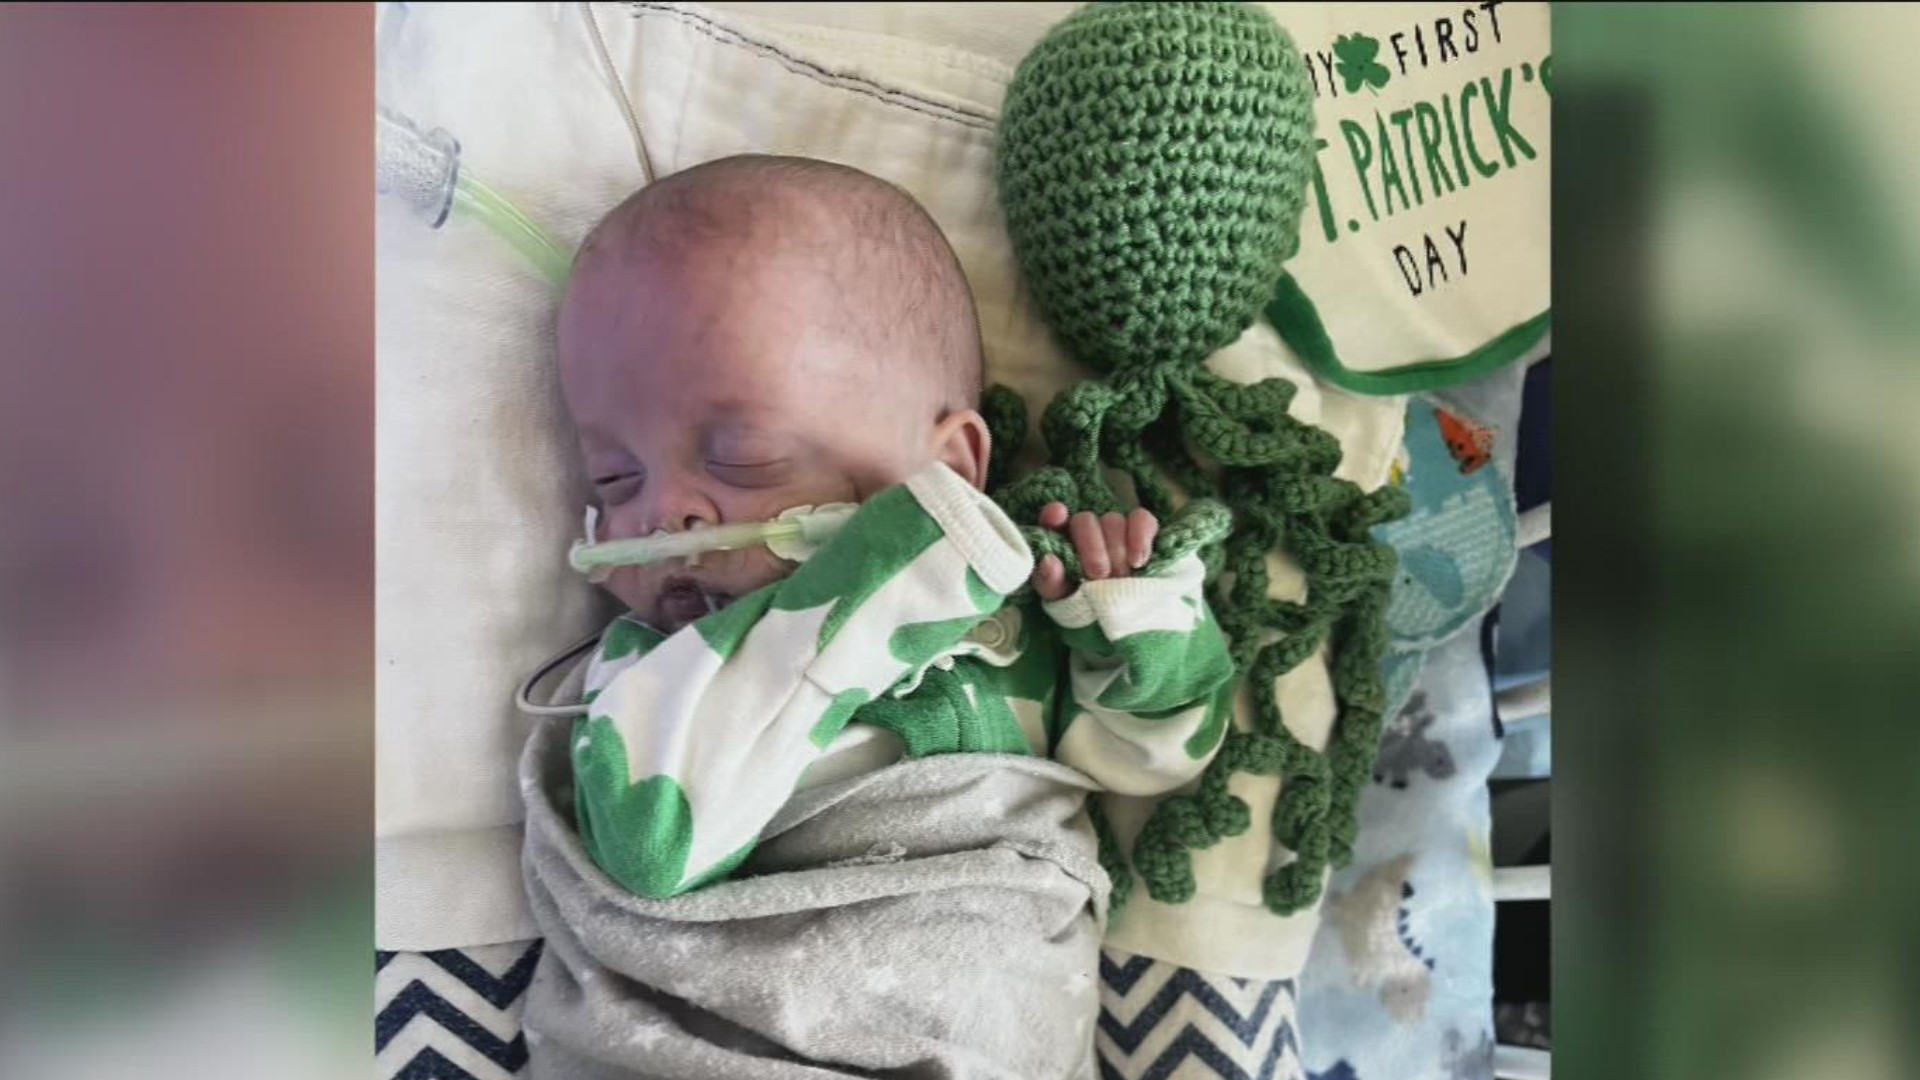 The staff that care for premature babies are asking people to donate crocheted octopi. One is given to each baby under the hospital's care.